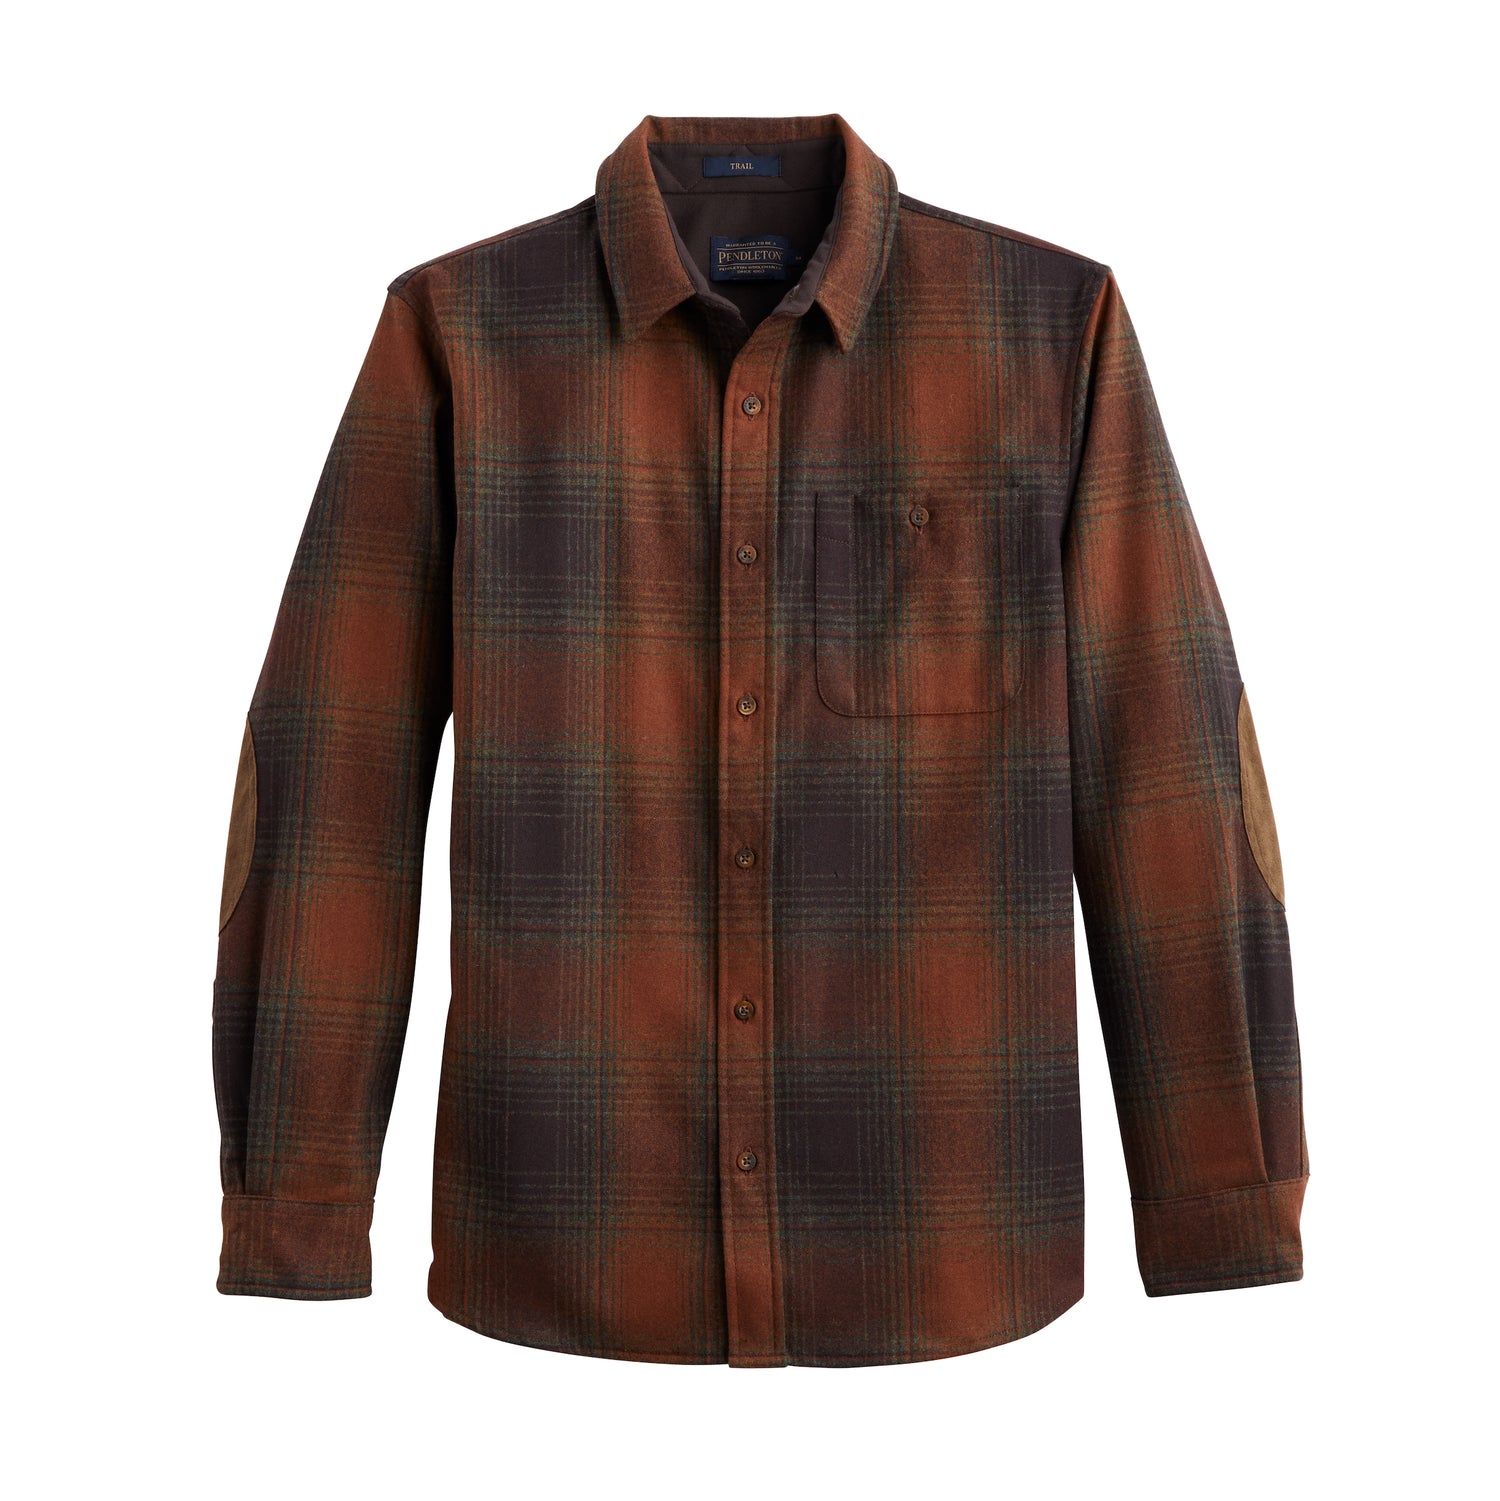 Trail Shirt - Brown / Green Mix Ombre